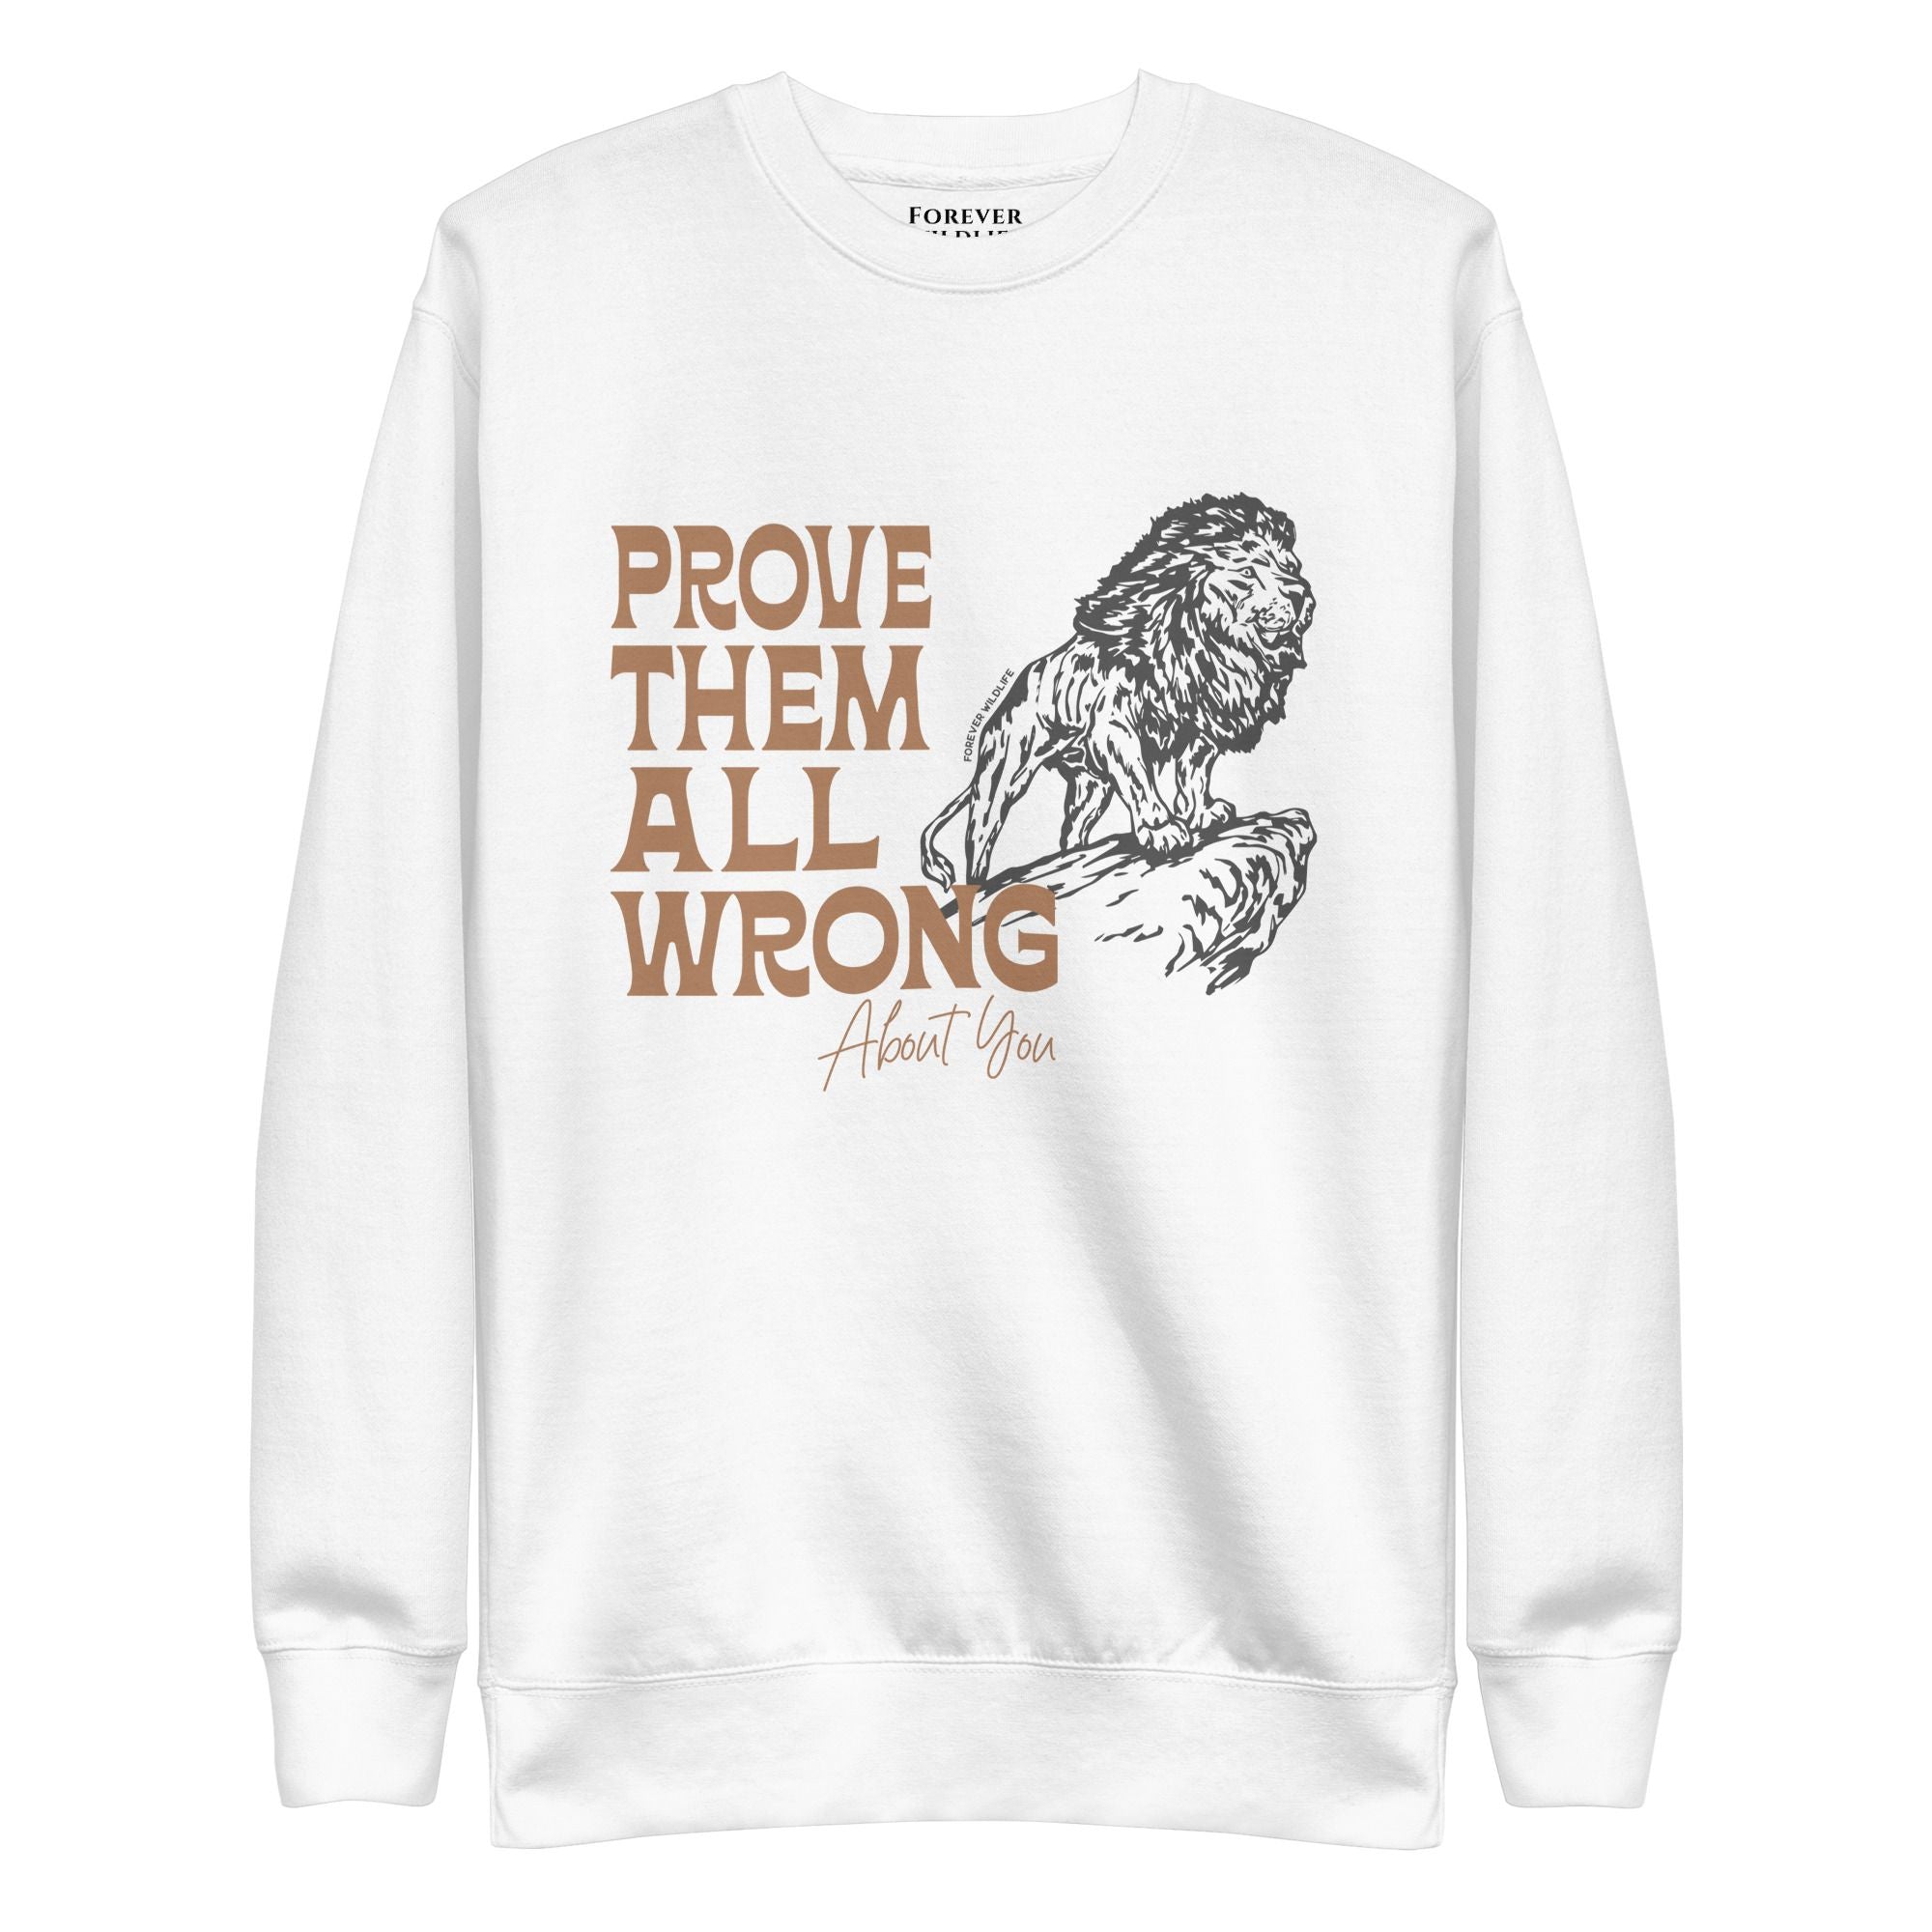 Lion Sweatshirt in White-Premium Wildlife Animal Inspiration Sweatshirt Design with 'Prove Them All Wrong About You' text, part of Wildlife Sweatshirts & Clothing from Forever Wildlife.